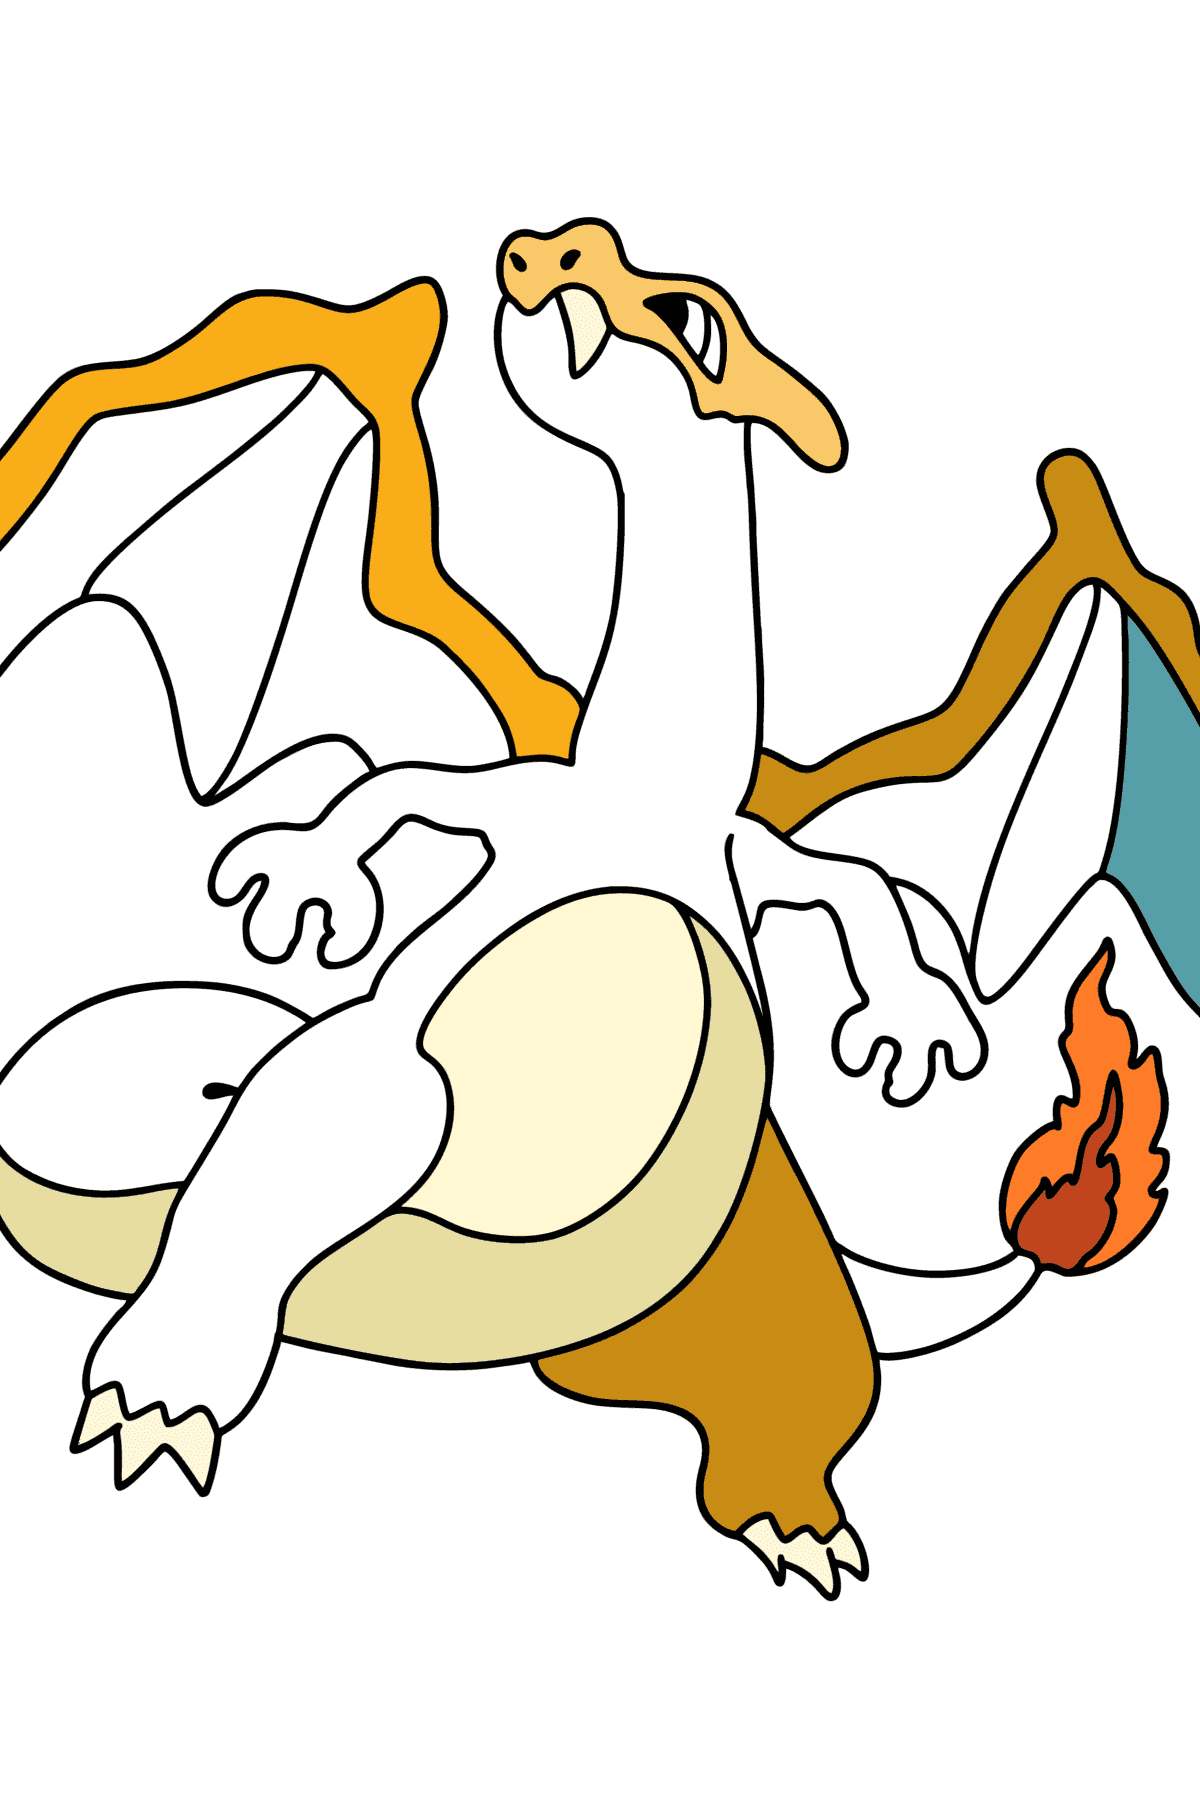 Pokémon Go Charizard coloring page - Coloring Pages for Kids